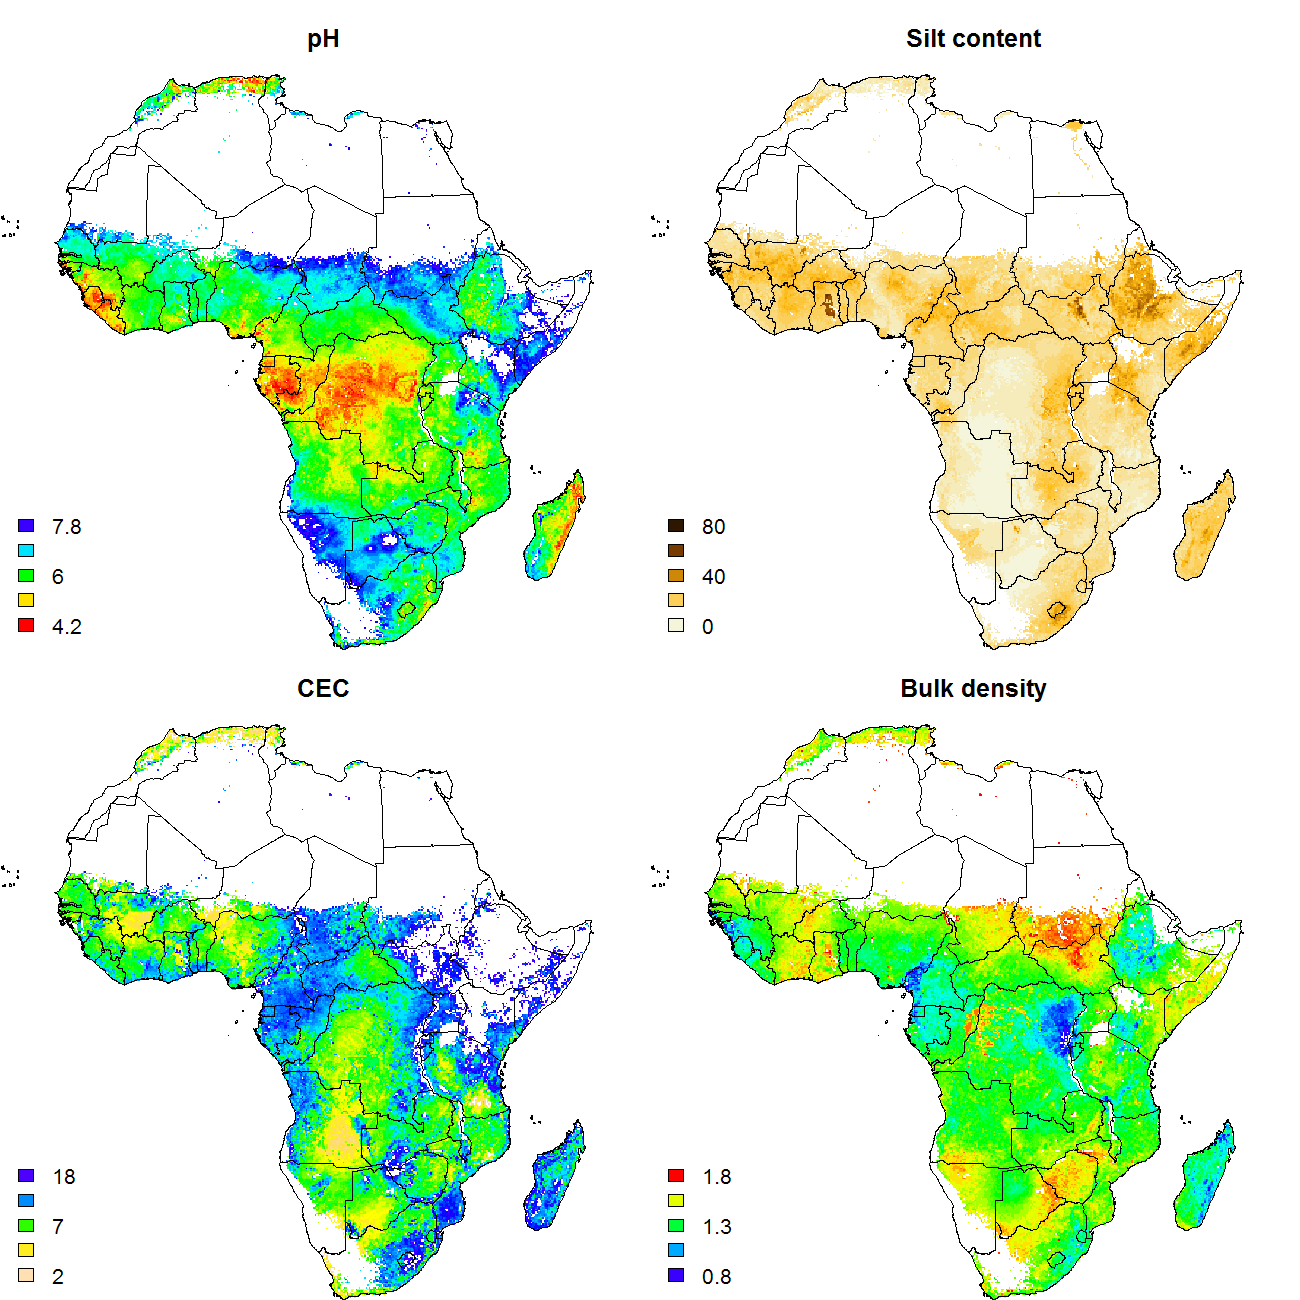 New generation soil property maps for Africa